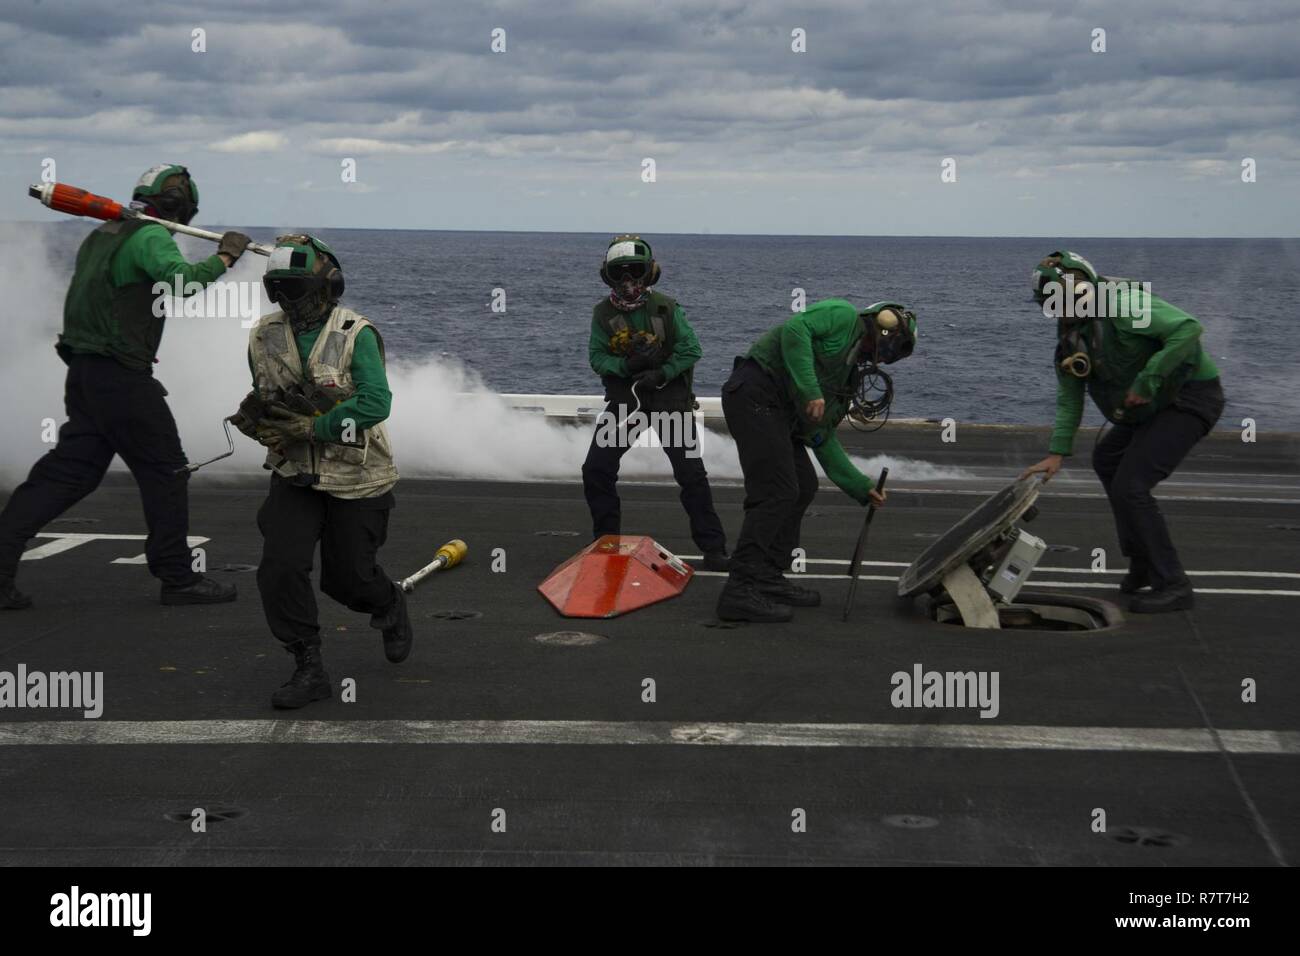 ATLANTIC OCEAN (April 3, 2017) Sailors prepare the flight deck for aircraft recovery during cyclic flight operations aboard the aircraft carrier USS Dwight D. Eisenhower (CVN 69). The ship and its carrier strike group are underway conducting a sustainment exercise in support of the Optimized Fleet Response Plan (OFRP). Stock Photo